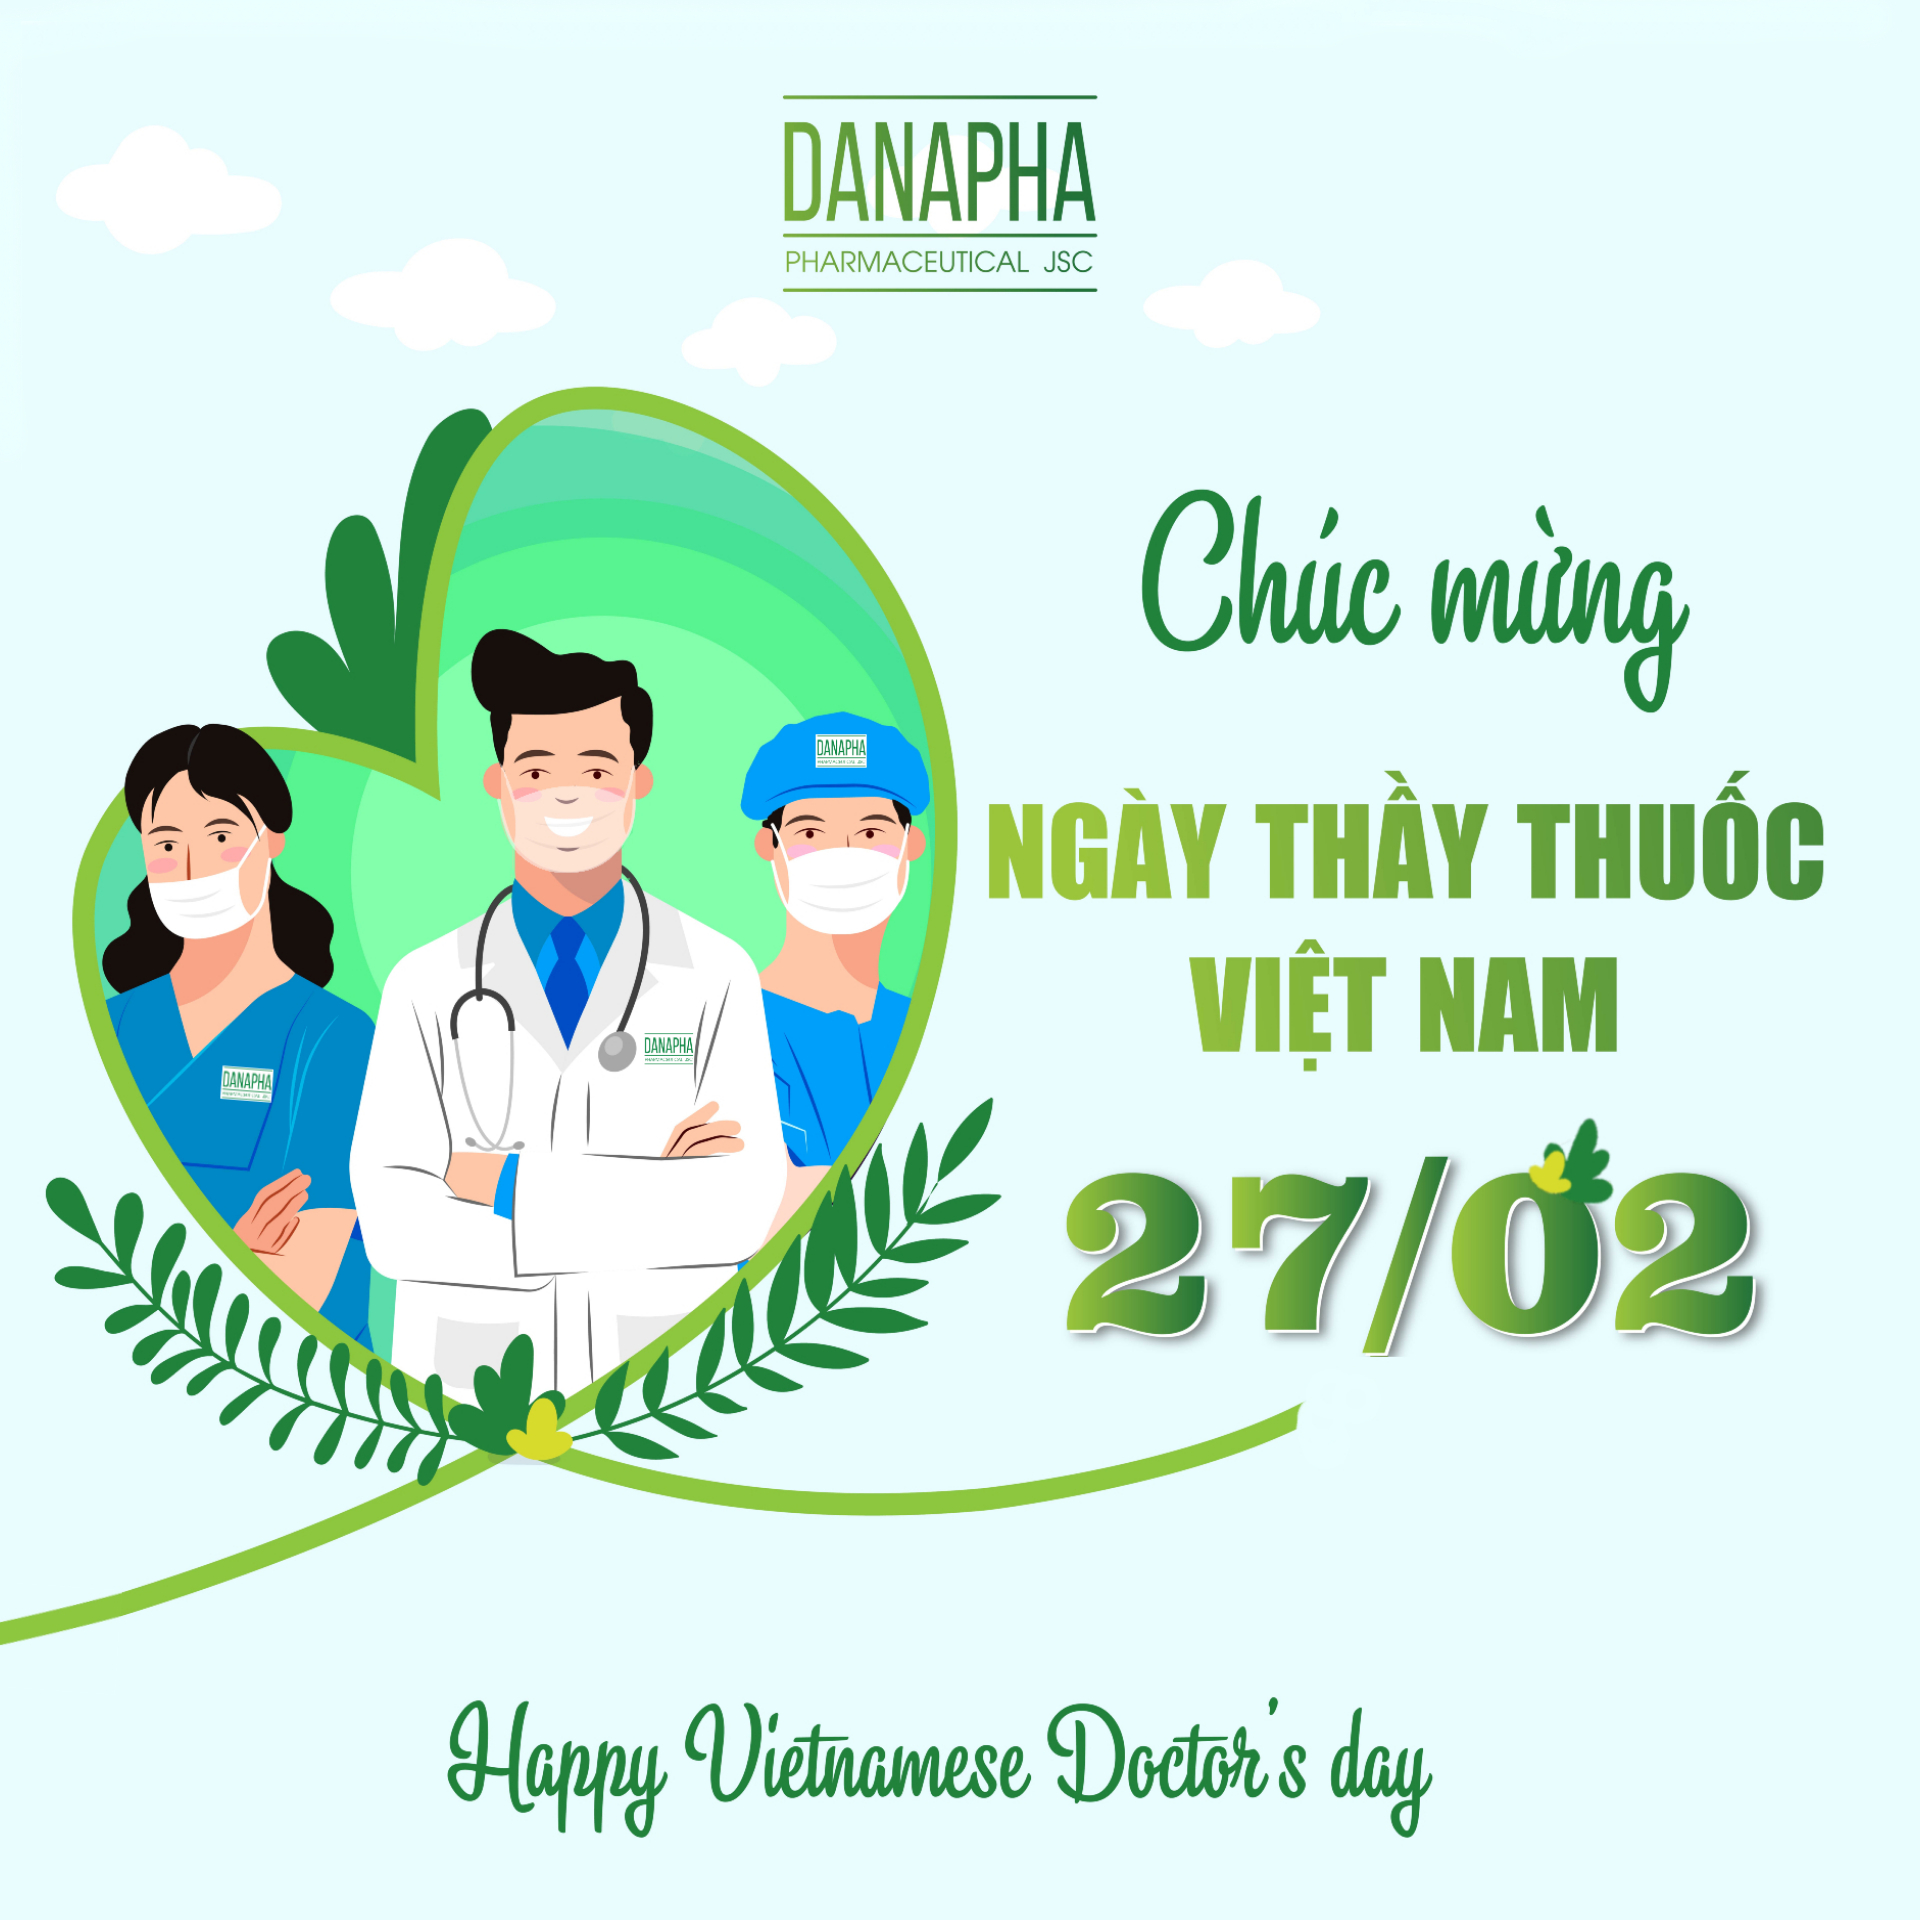 THE PARTY COMMITTEE OF DA NANG HI-TECH PARK AND INDUSTRIAL ZONES  CONGRATULATED DANAPHA ON VIETNAMESE DOCTOR'S DAY